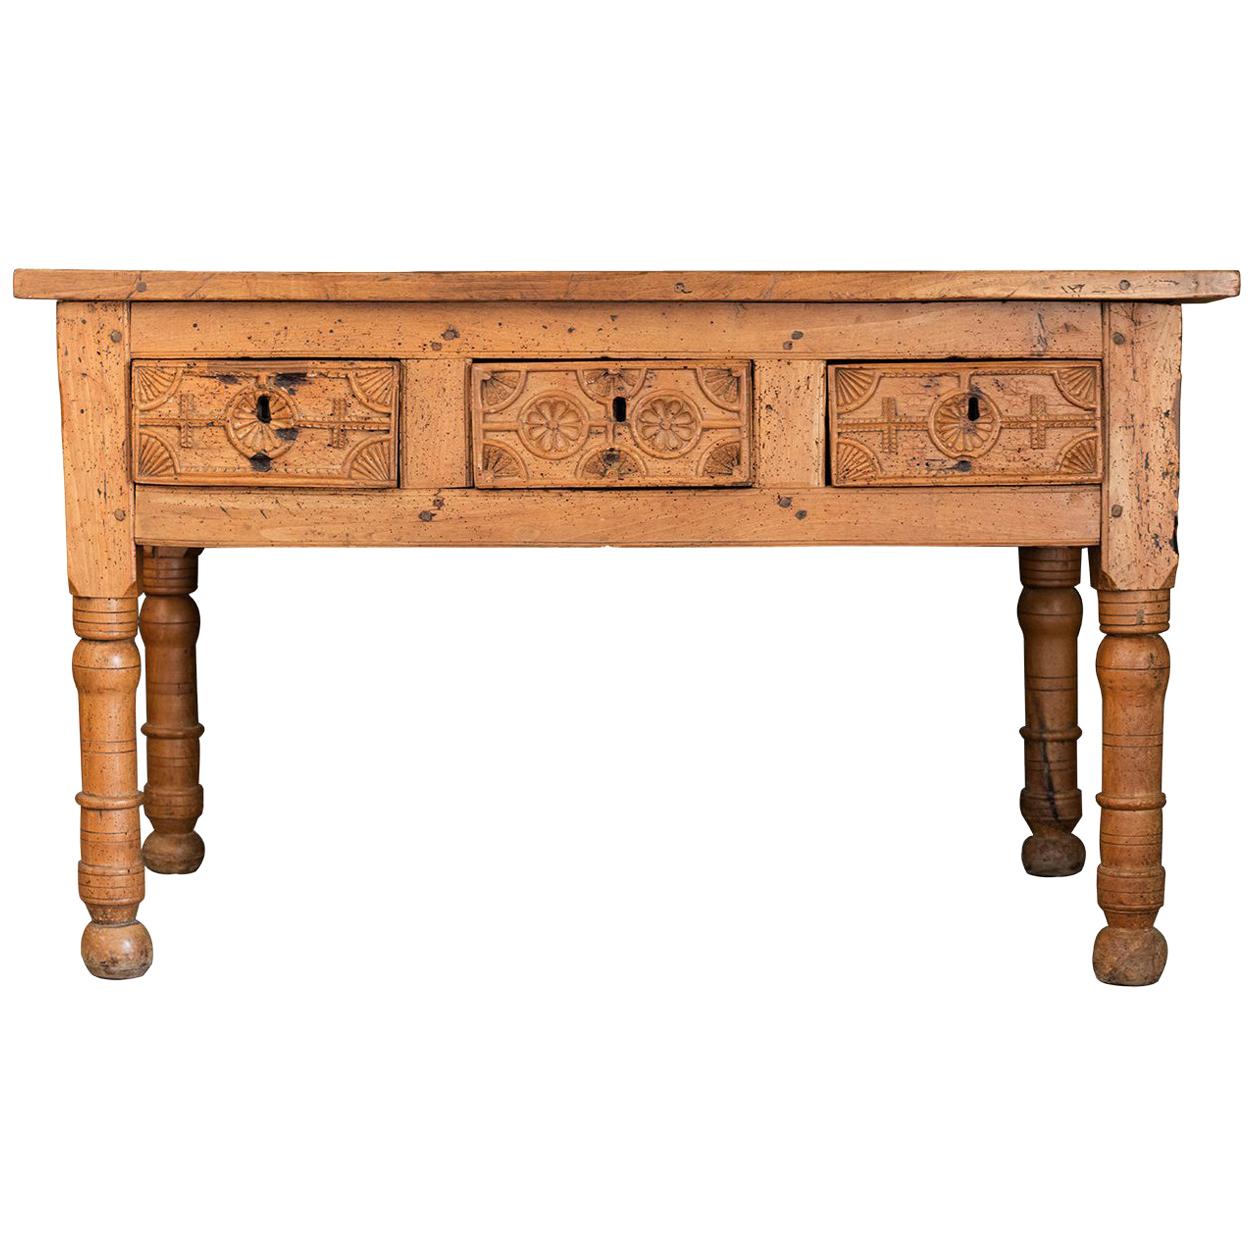 Antique Spanish Table, Wood, Artisanal, Furniture, 18th Century For Sale